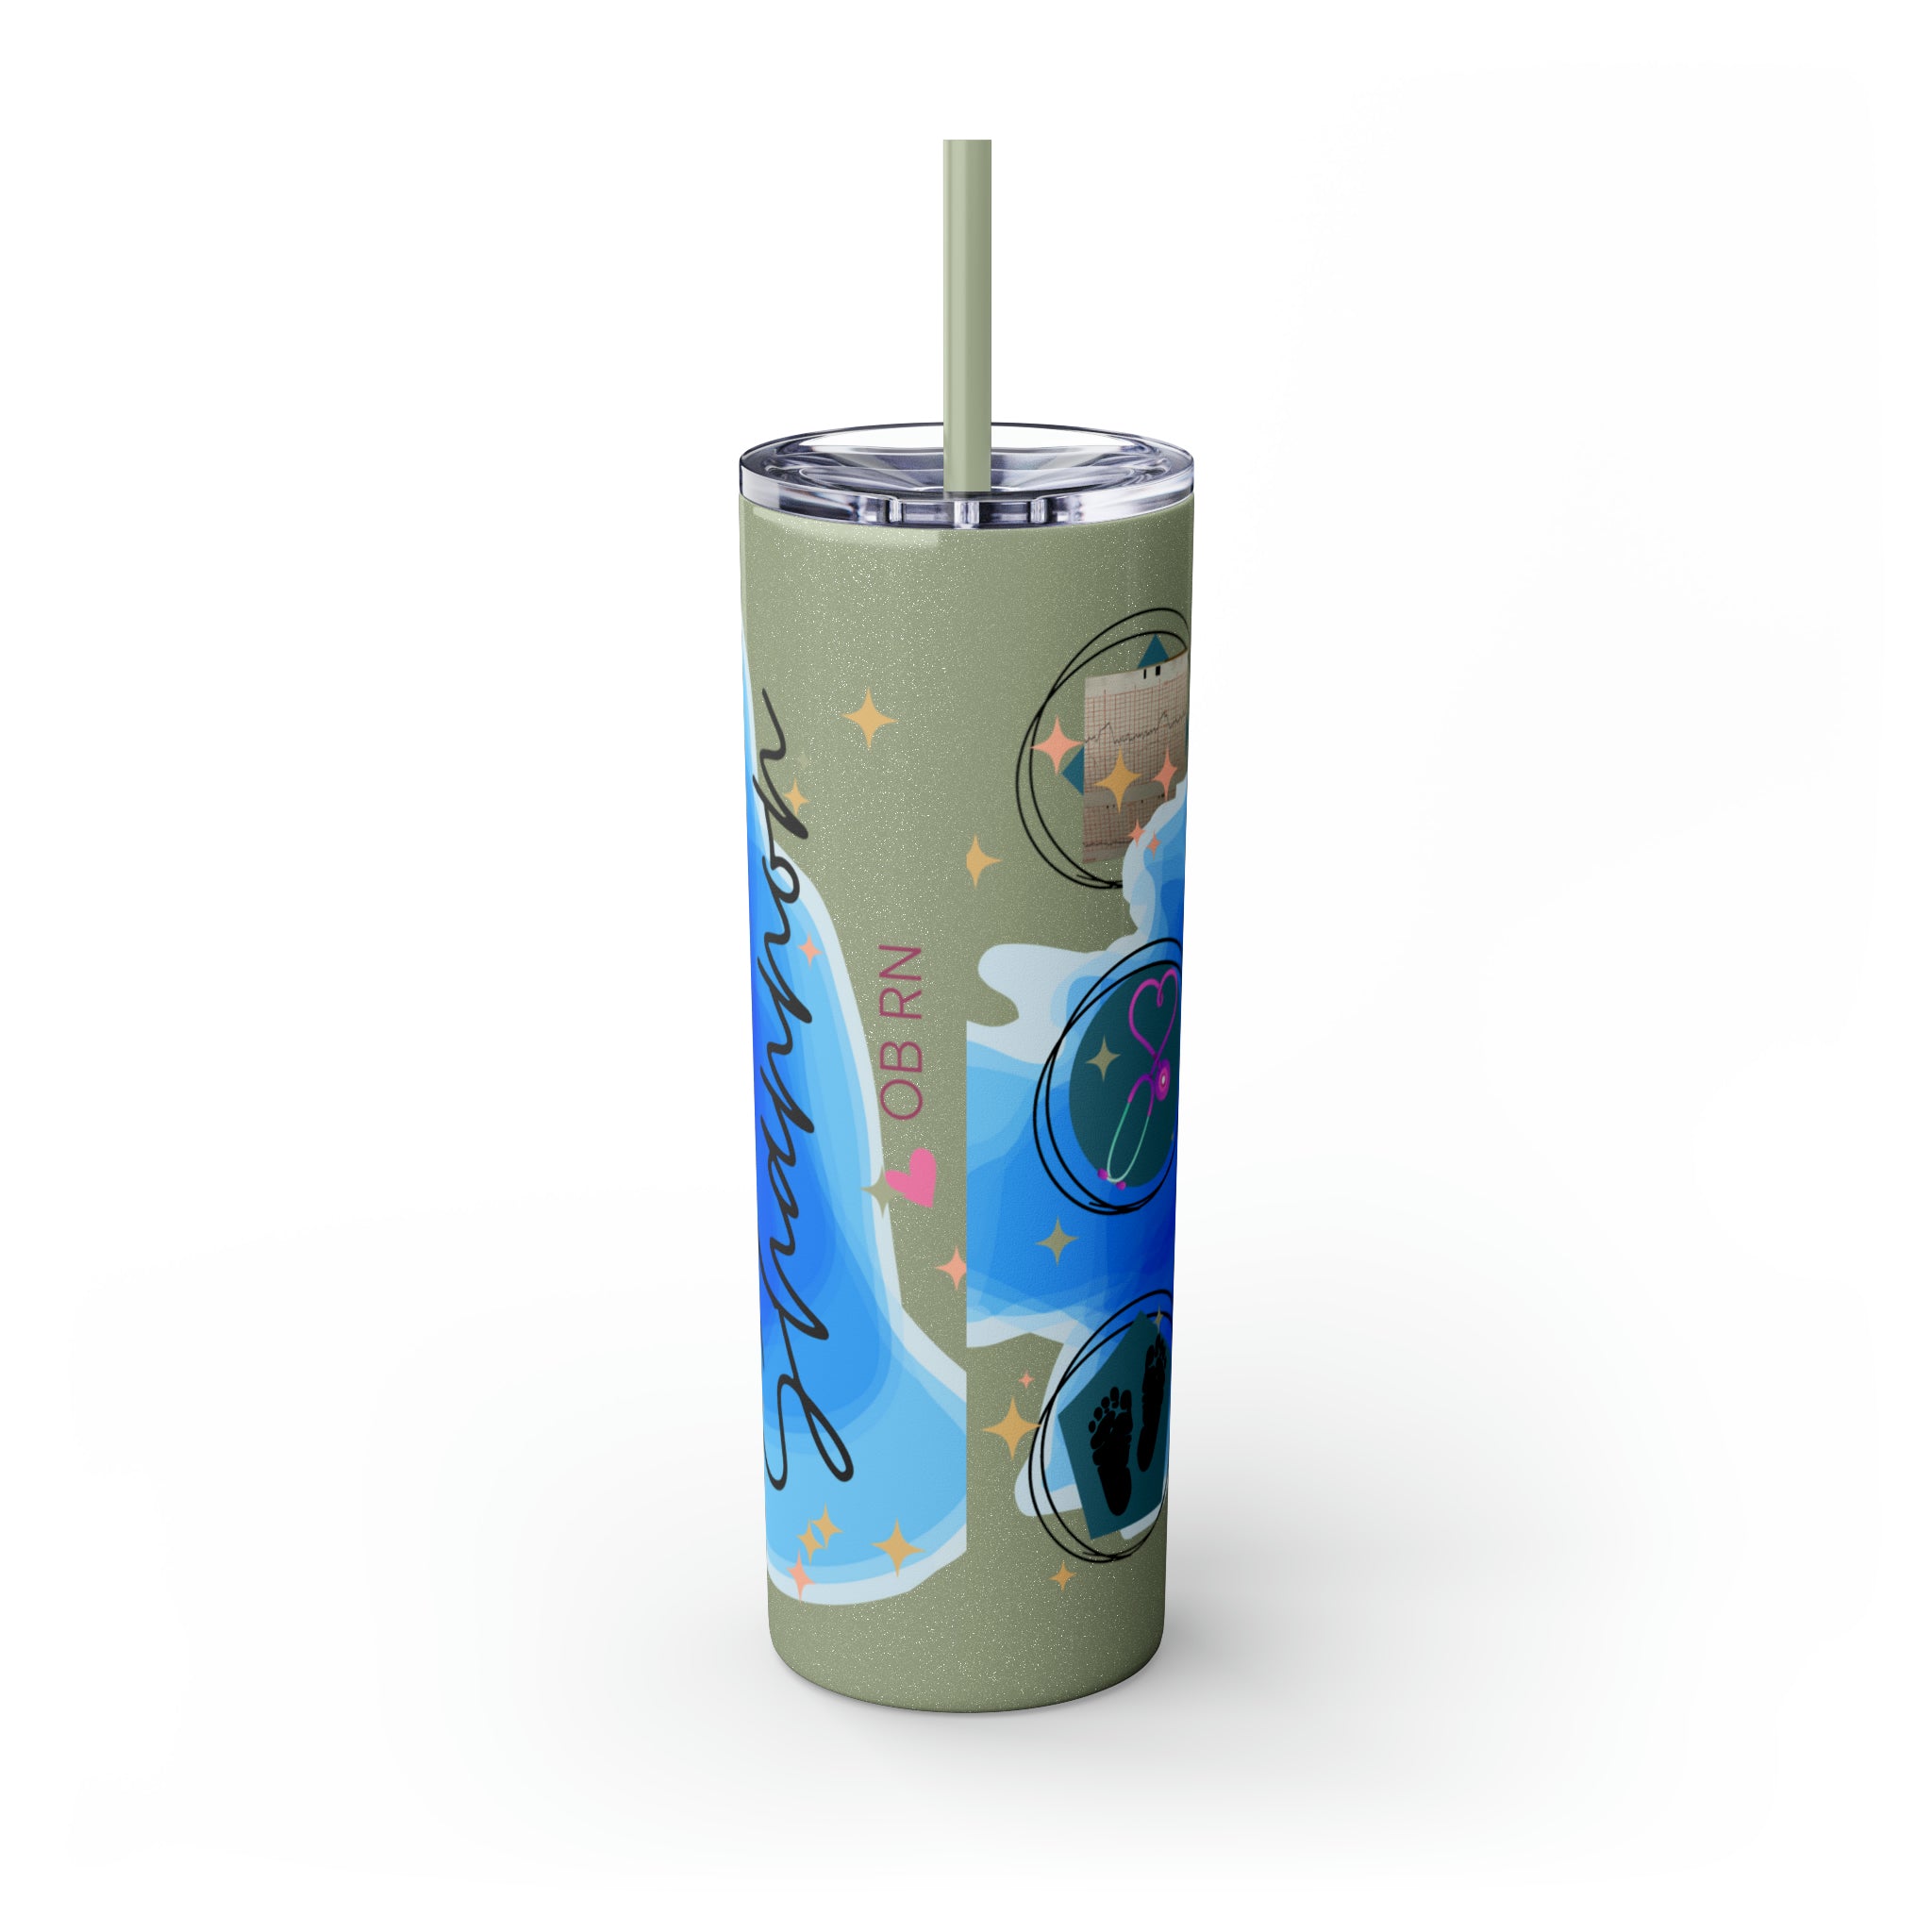 OB Nurse Skinny Tumbler with Straw, 20oz for hot or cold drinks.